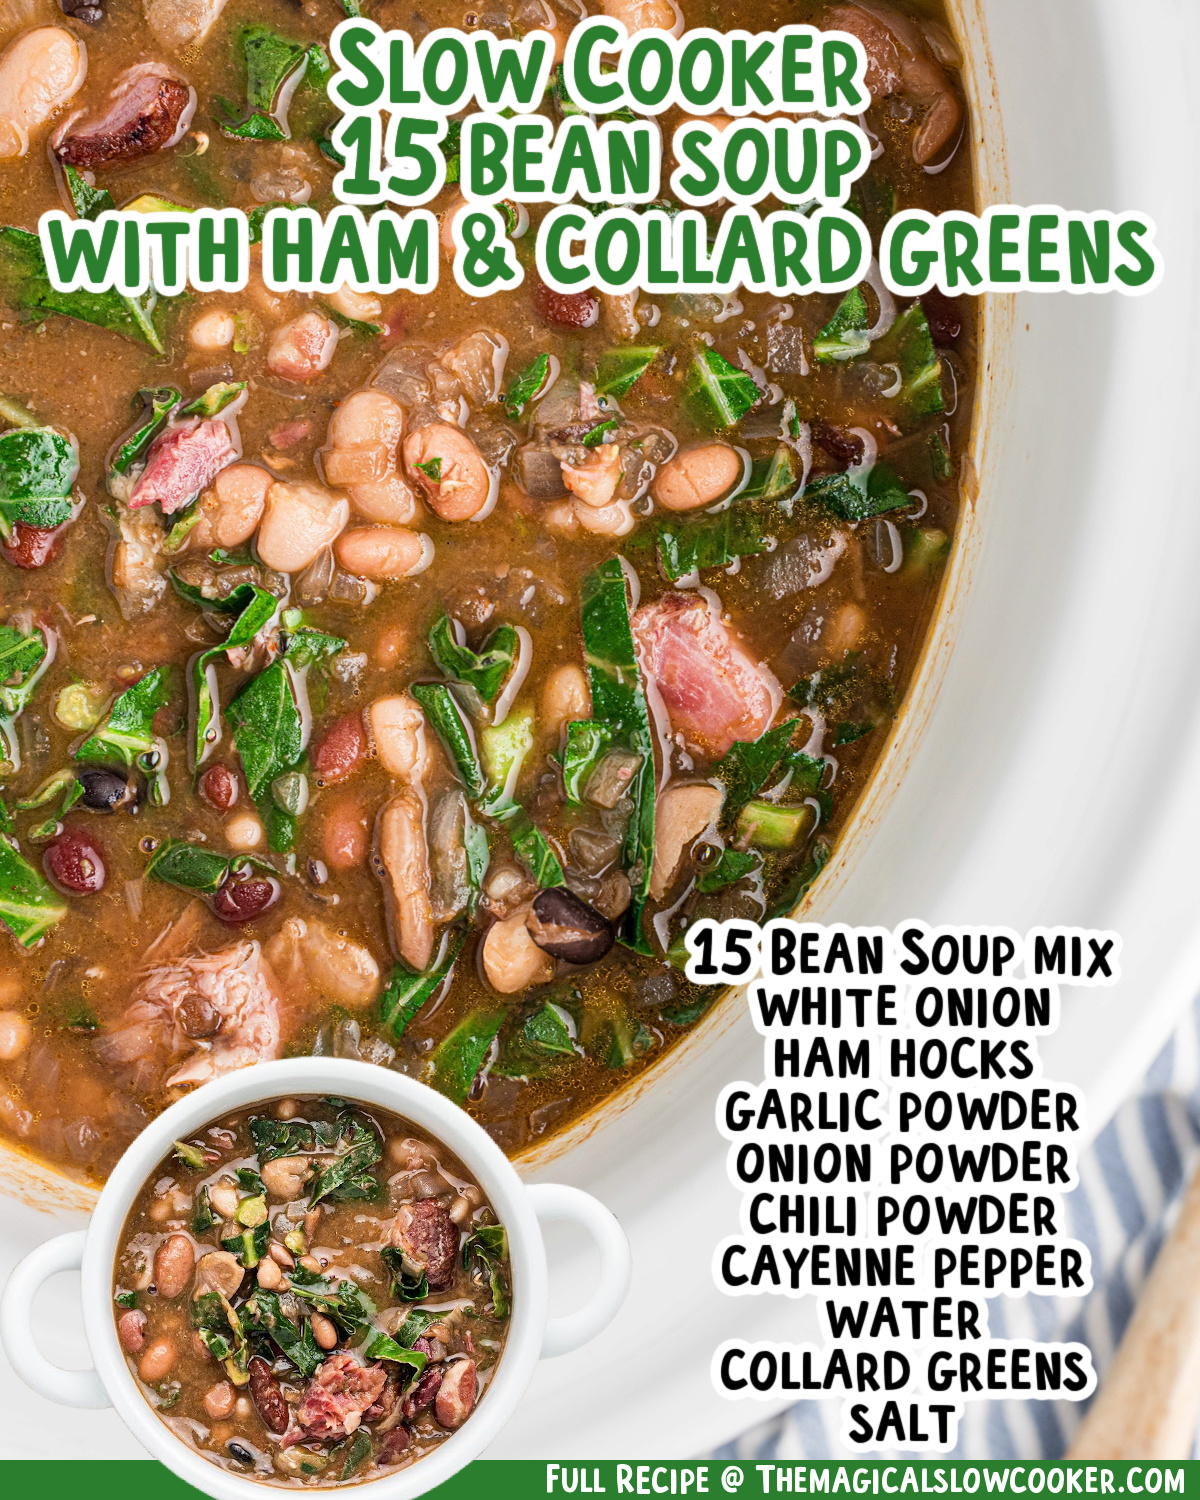 two images of slow cooker 15 bean soup with ham and collard greens with text list of ingredients.